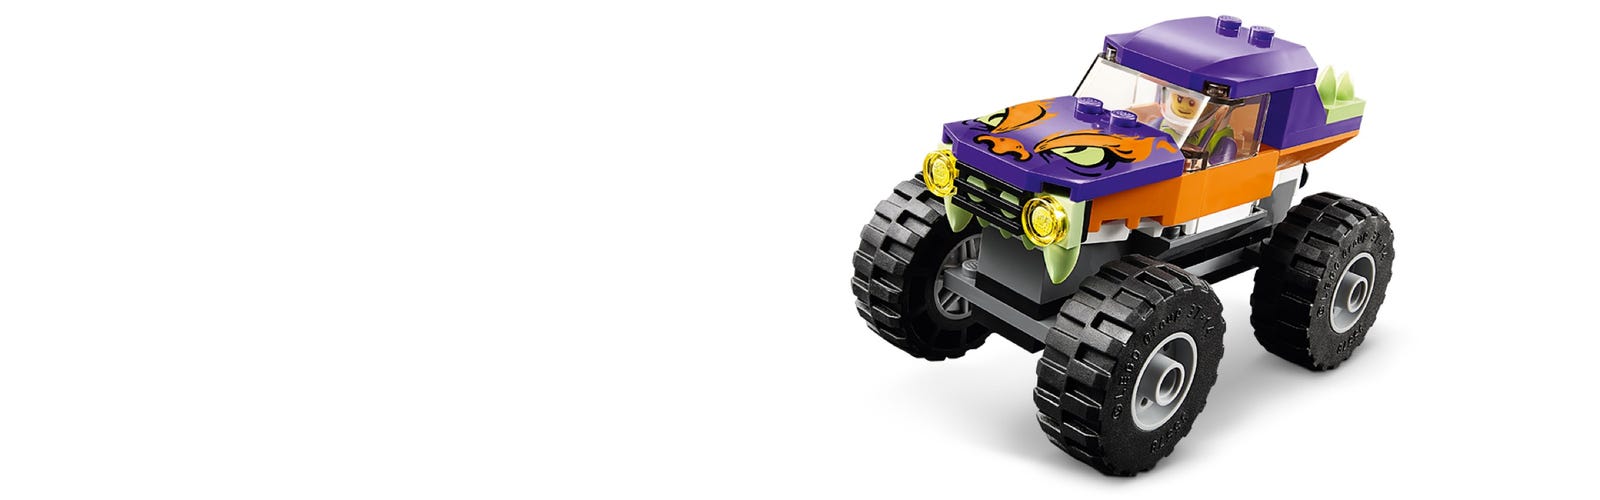 LEGO City Monster Truck 60251 Building Sets for Kids (55 Pieces)